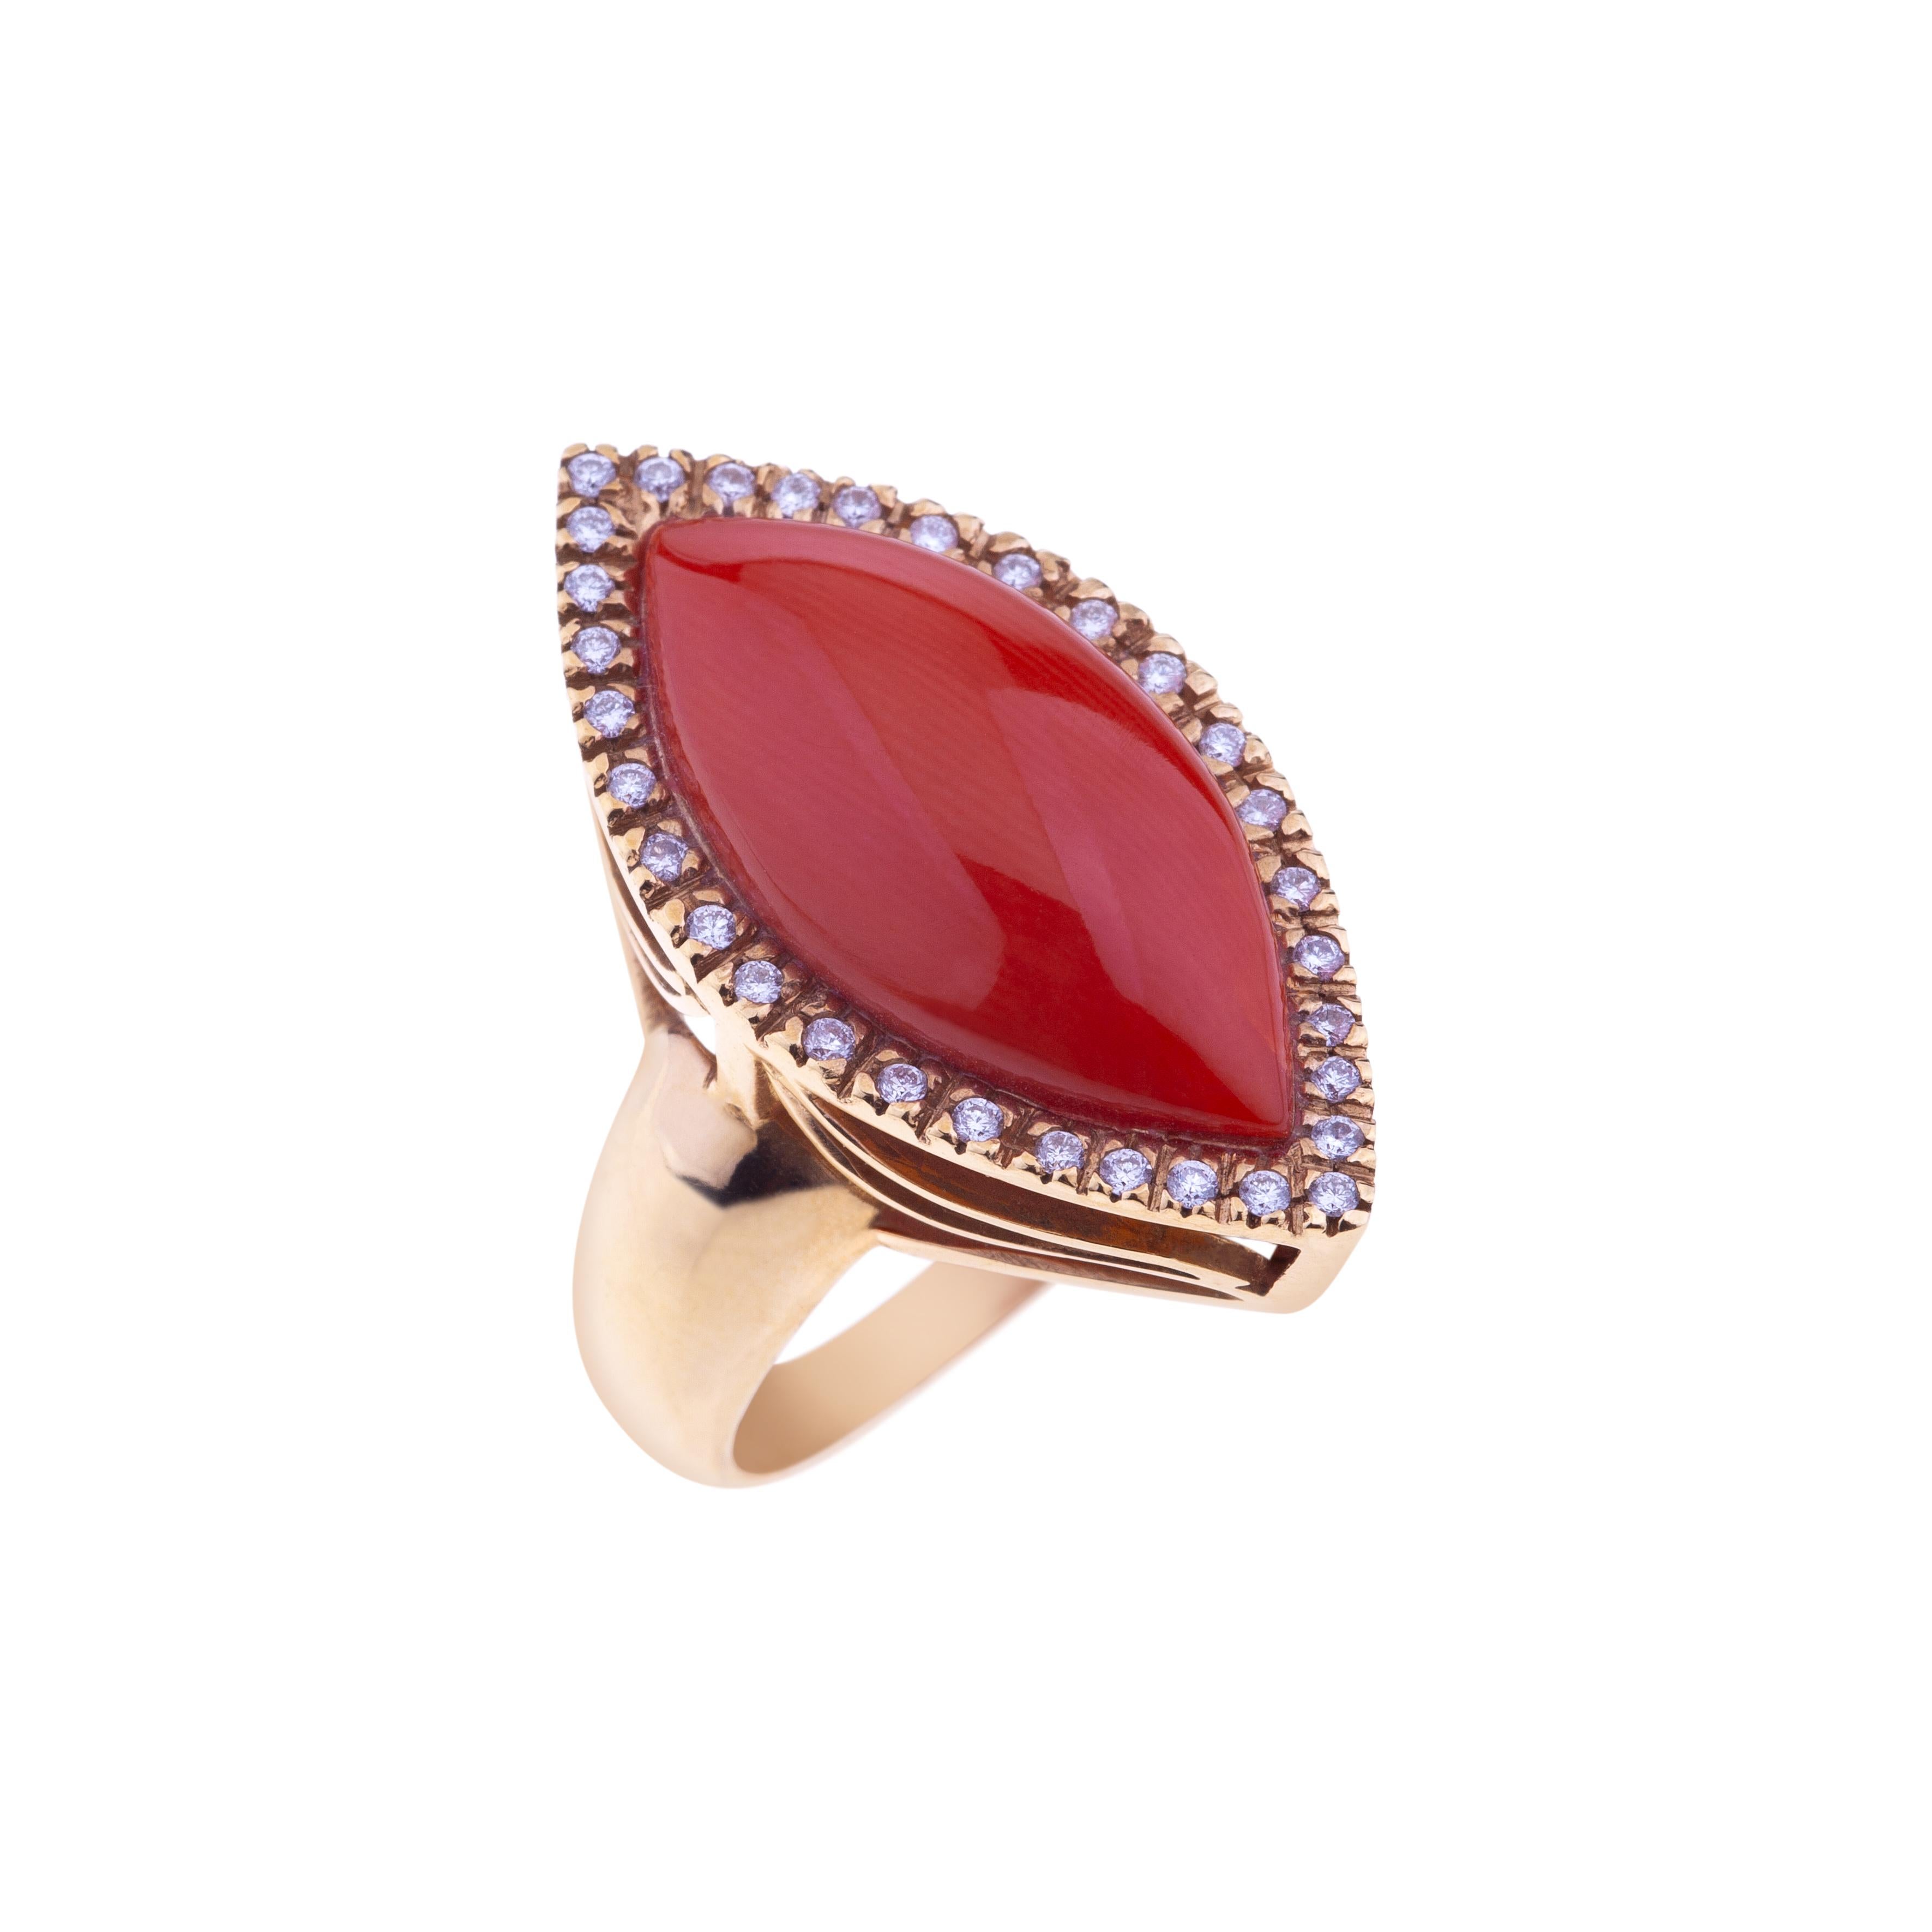 Rose Gold Ring with Marquise Mediterranean Coral and Diamond Profile.
A Classic Design for this Ring with a Exceptional Red Mediteranean Coral set on Pink Gold and Diamond Profile (ct.0.40).
Wholly Manufactured in Italy by expert hands of